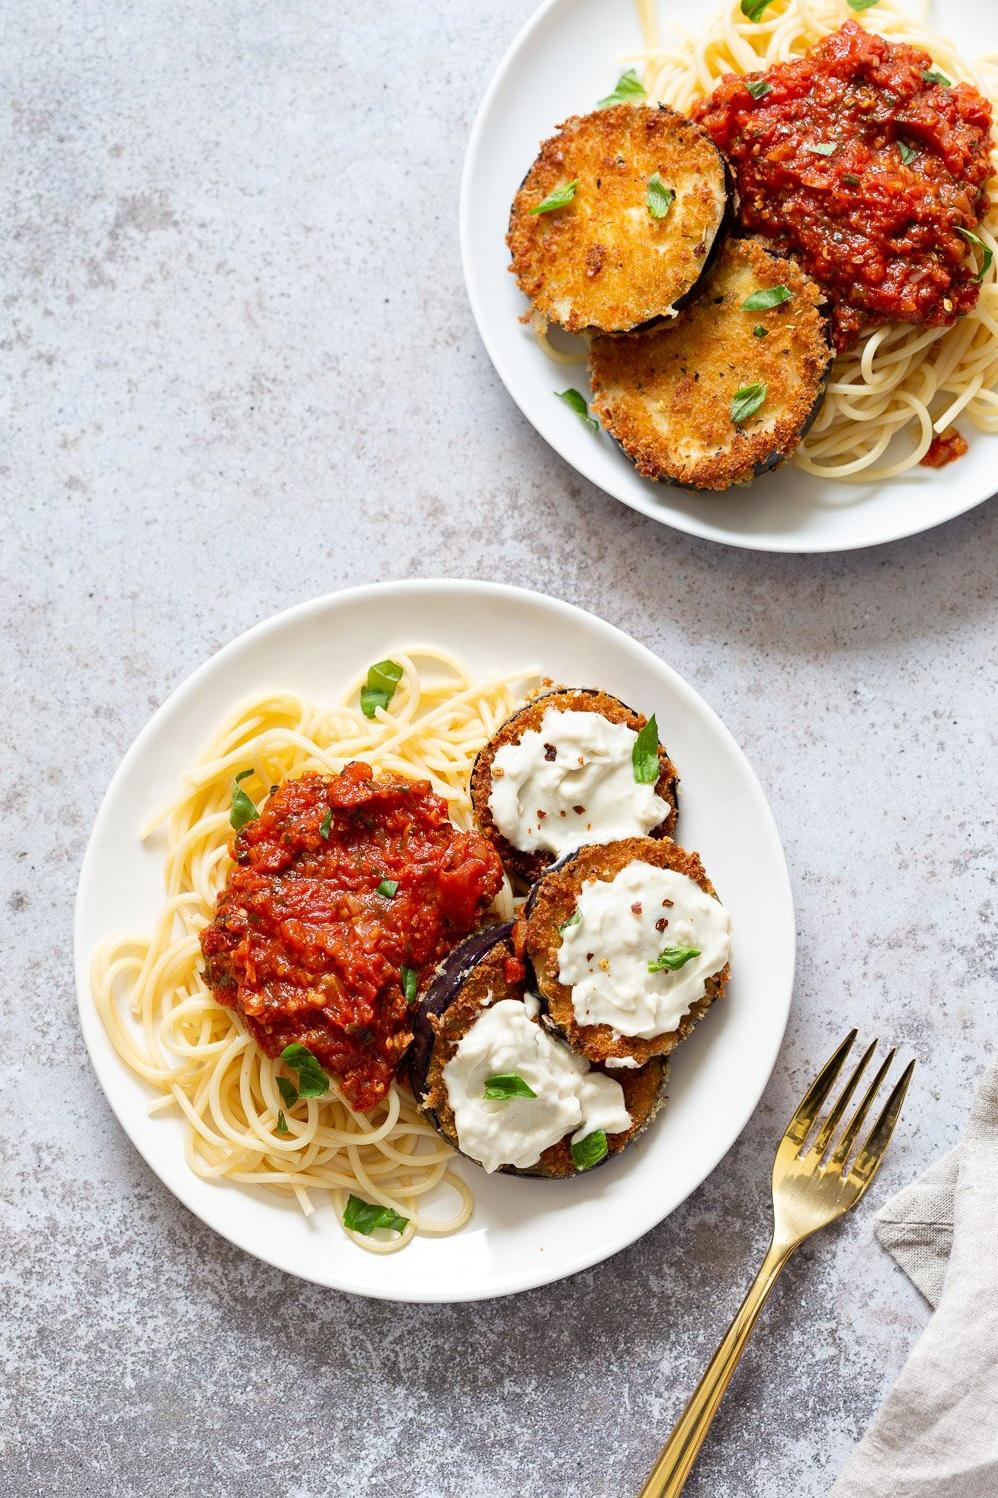  Ready for a hearty, healthy and ethical dinner? Don’t miss out on this Vegan Eggplant Parmigiana!